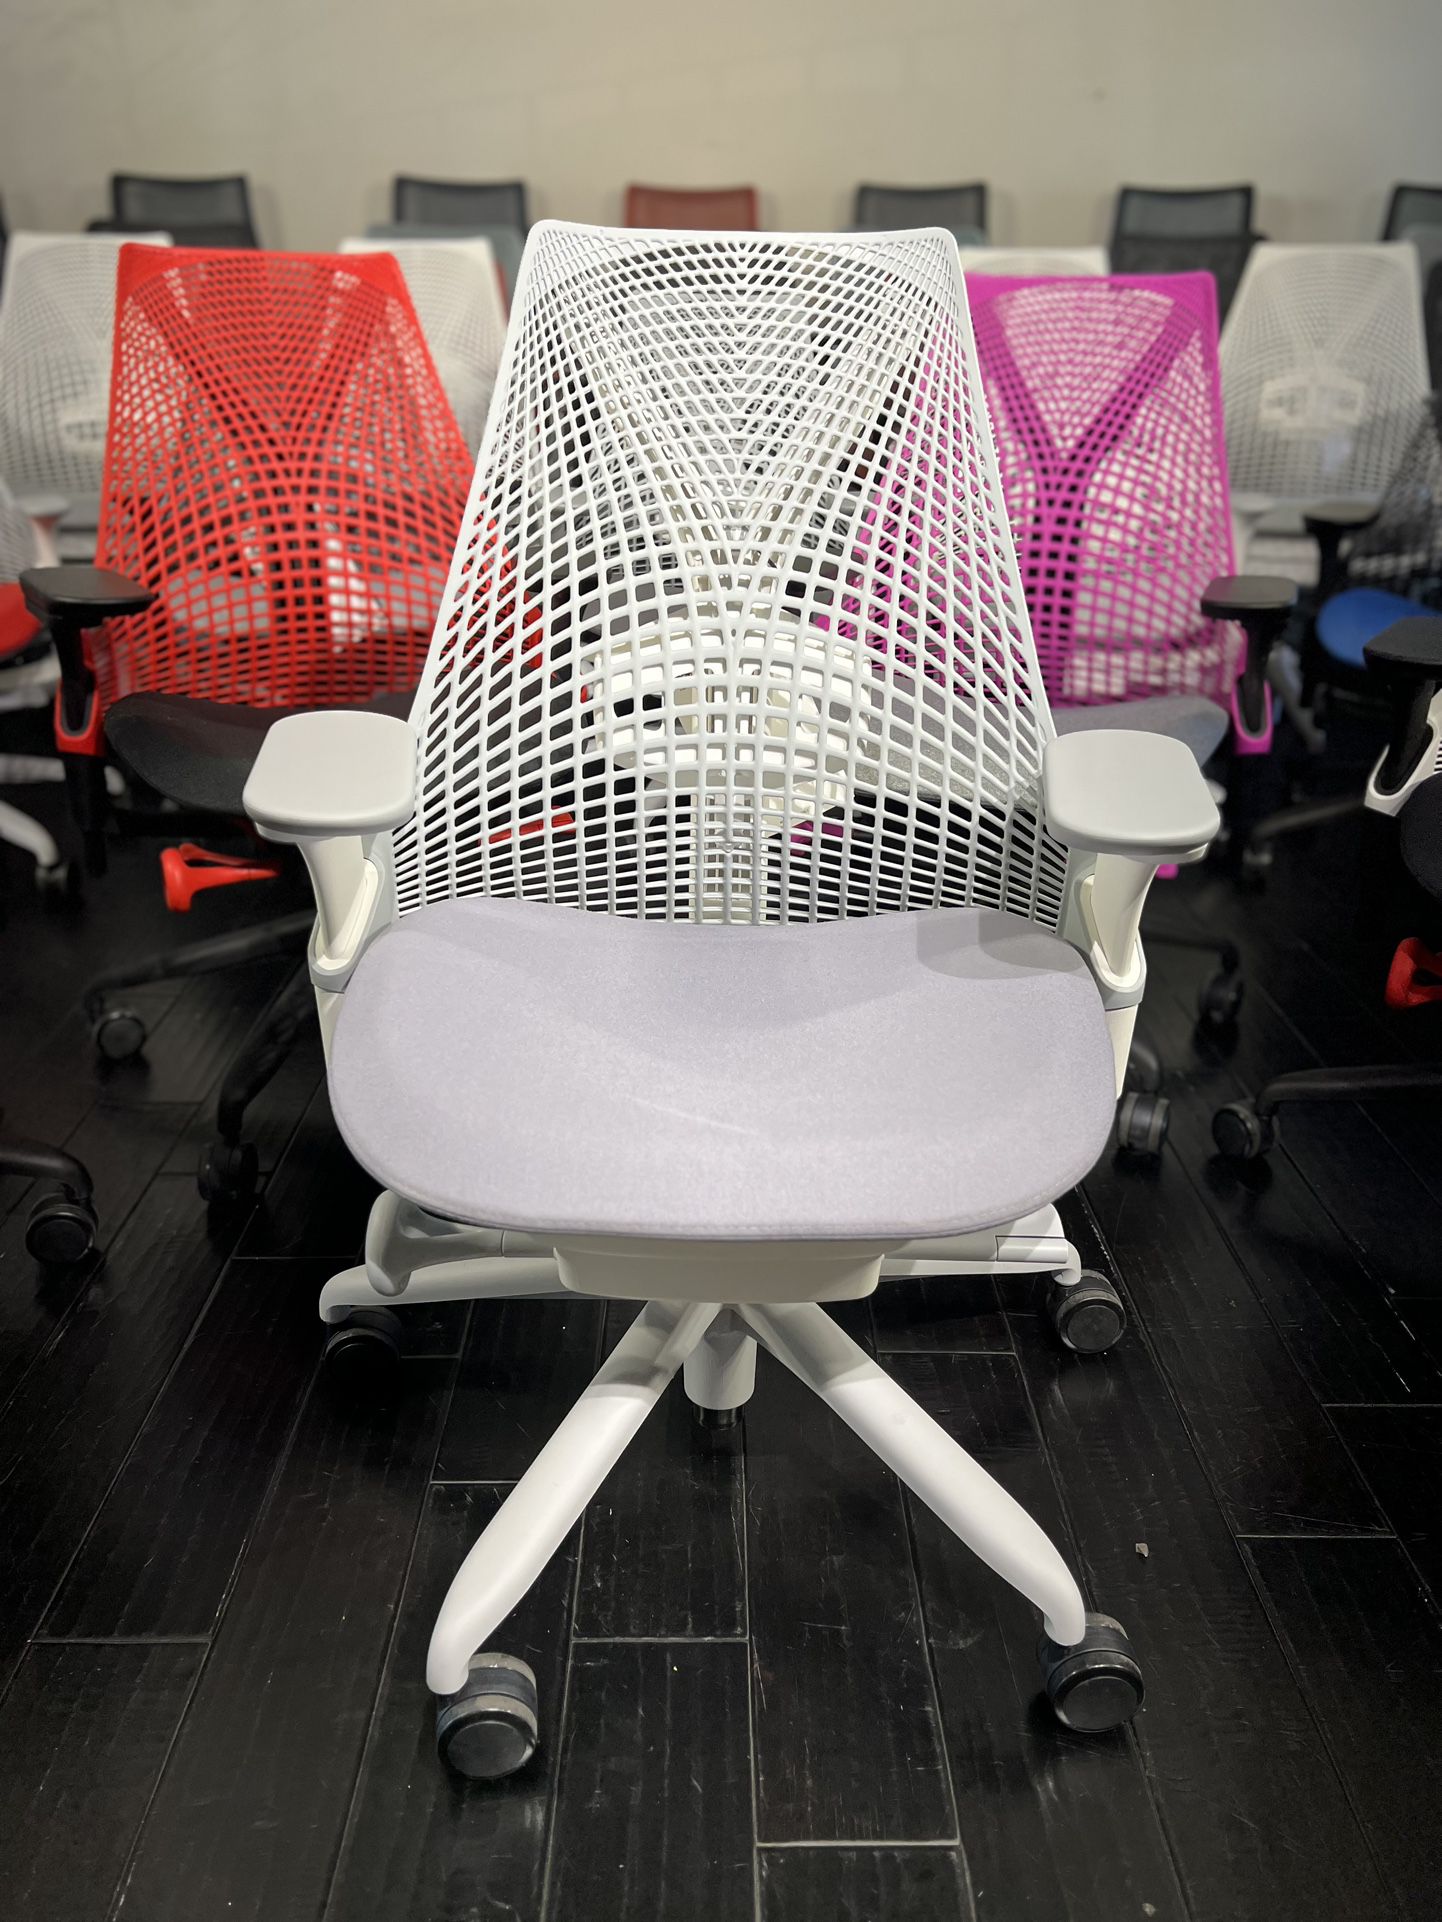 NEW HERMAN MILLER SAYL ALL COLORS/OPTIONS IN STOCK!